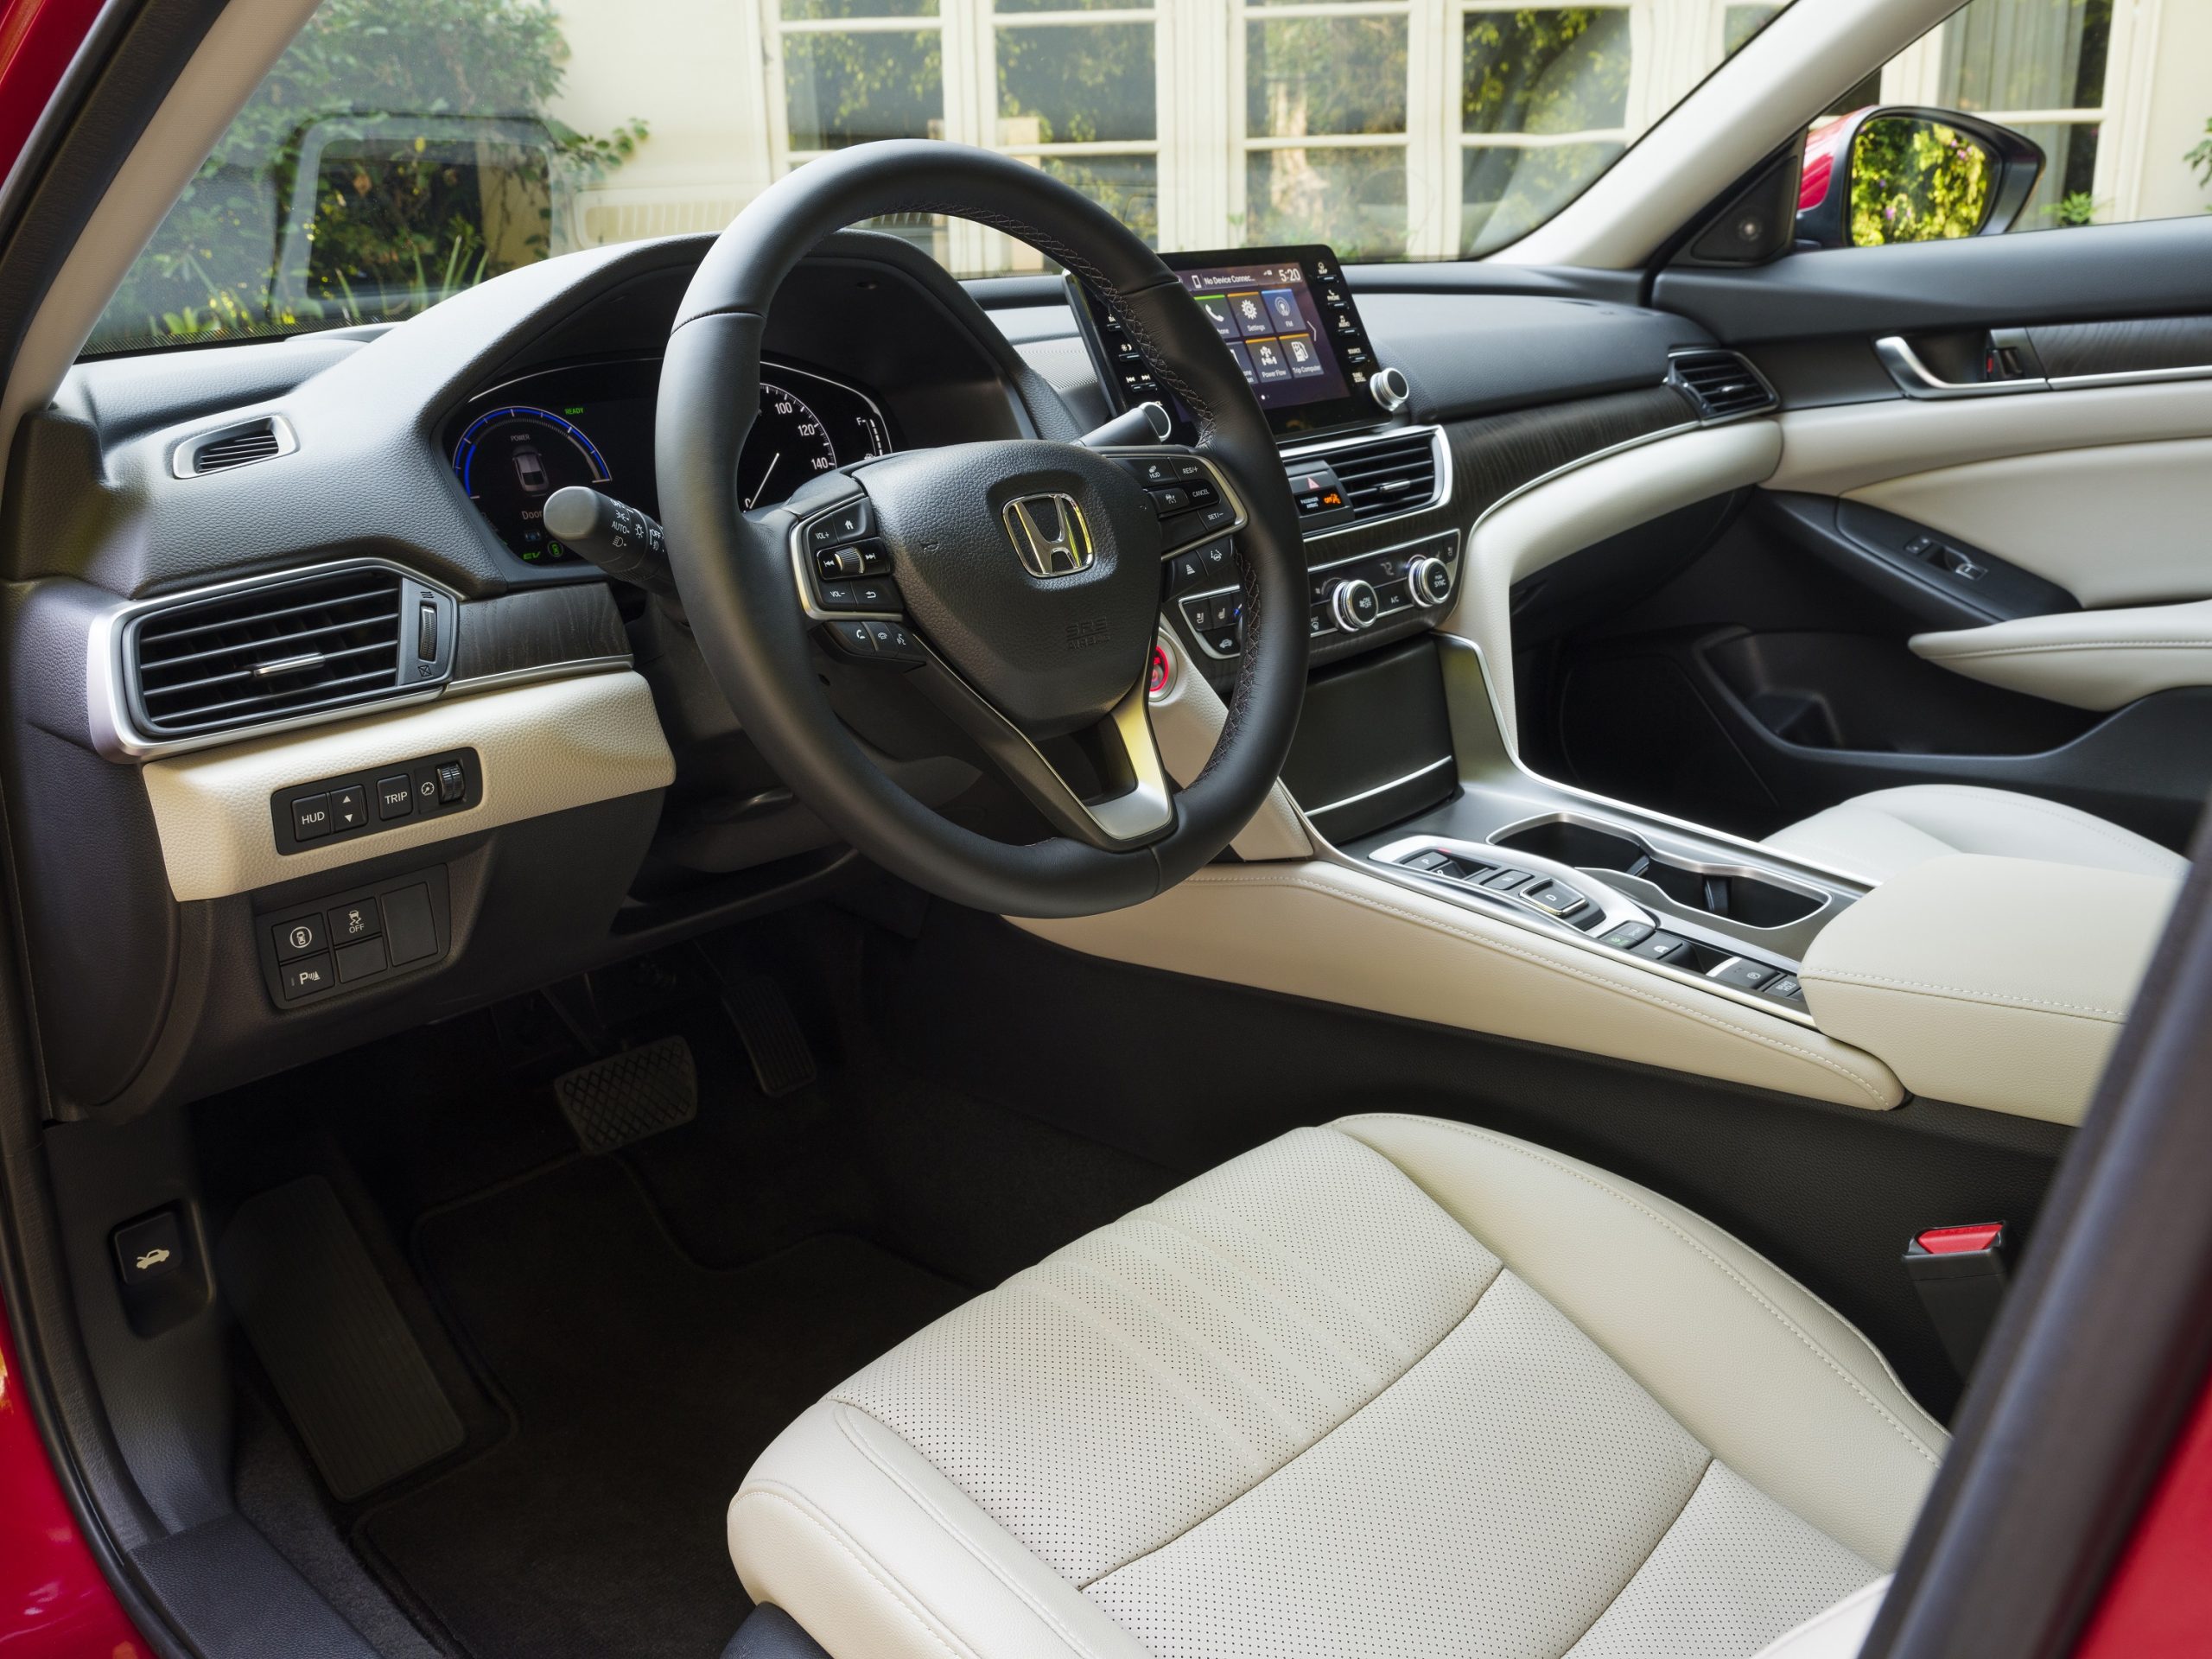 The beige and black interior of the new Honda Accord